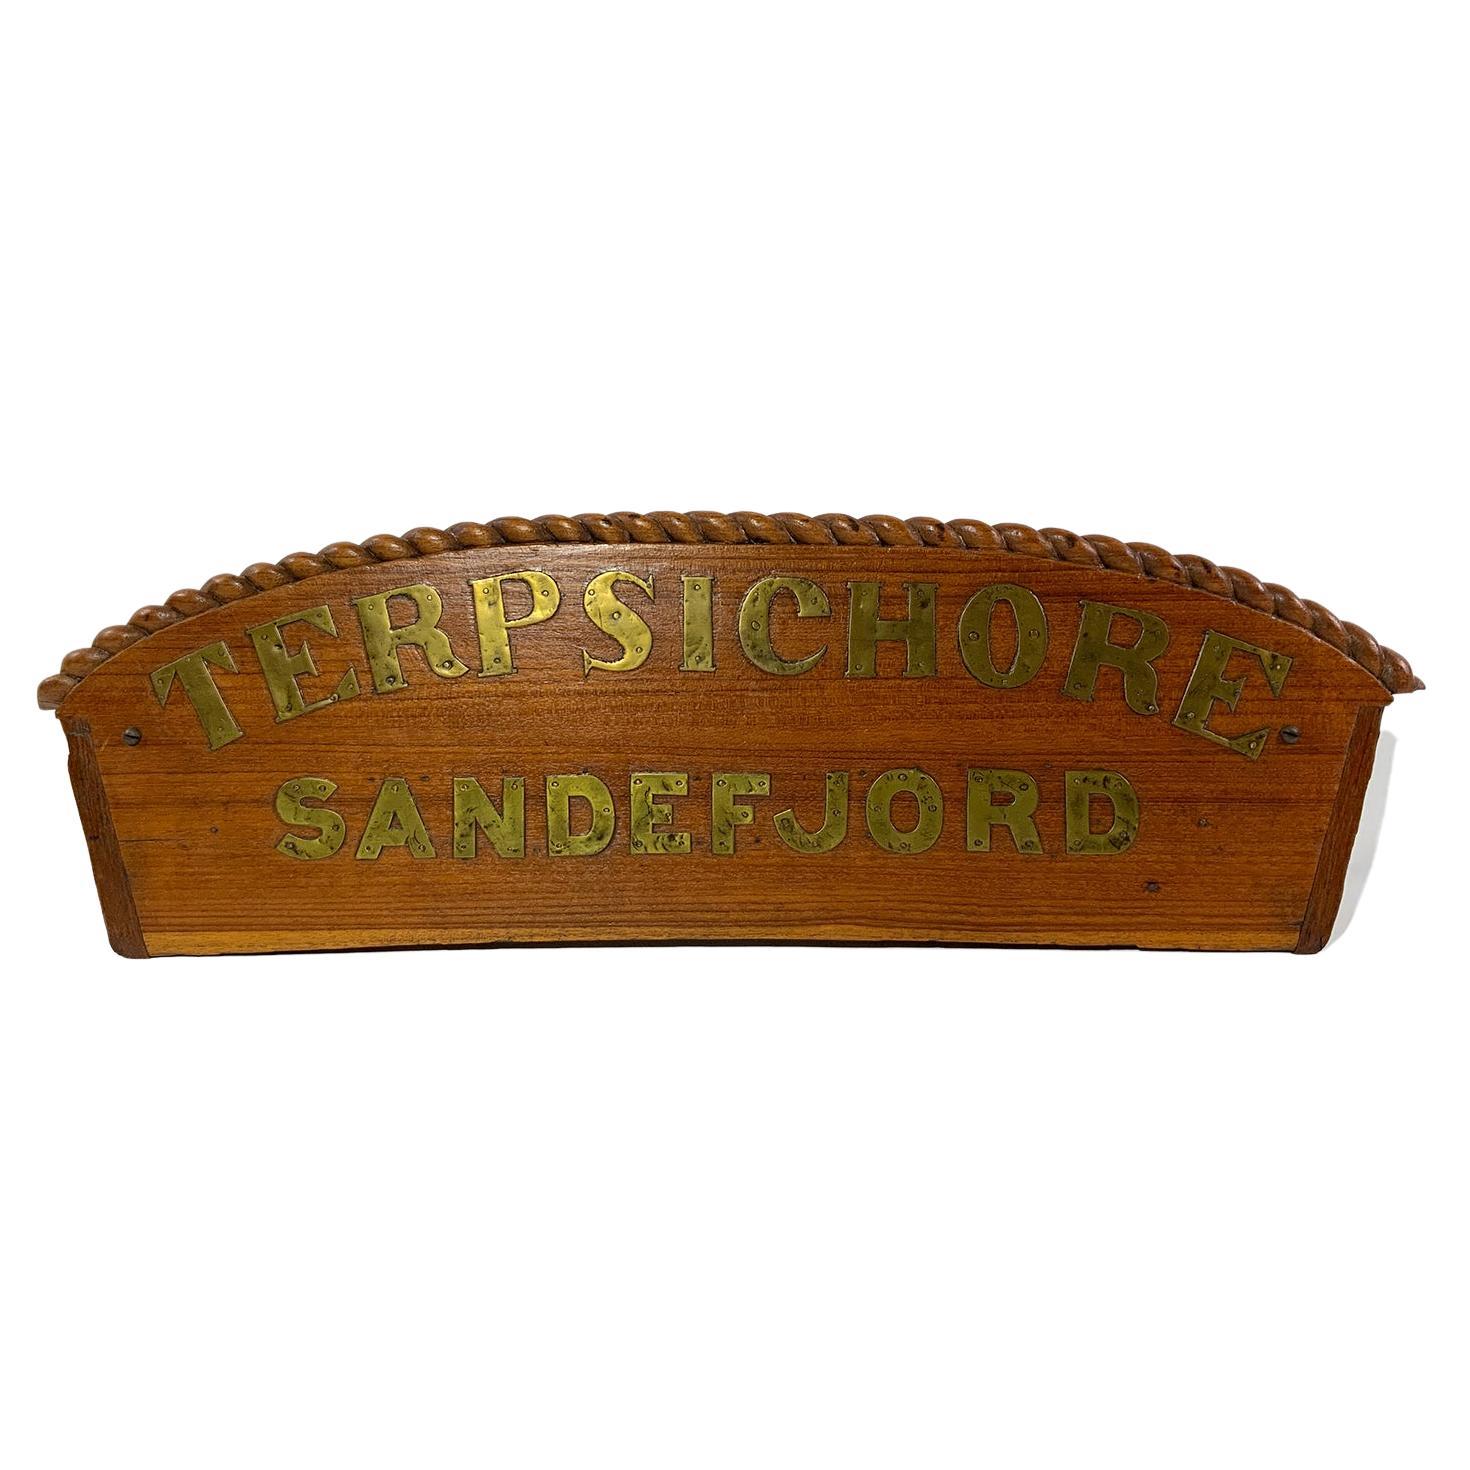 Carved Wood Sternboard from Captain's Gig On "Terpsichore" For Sale